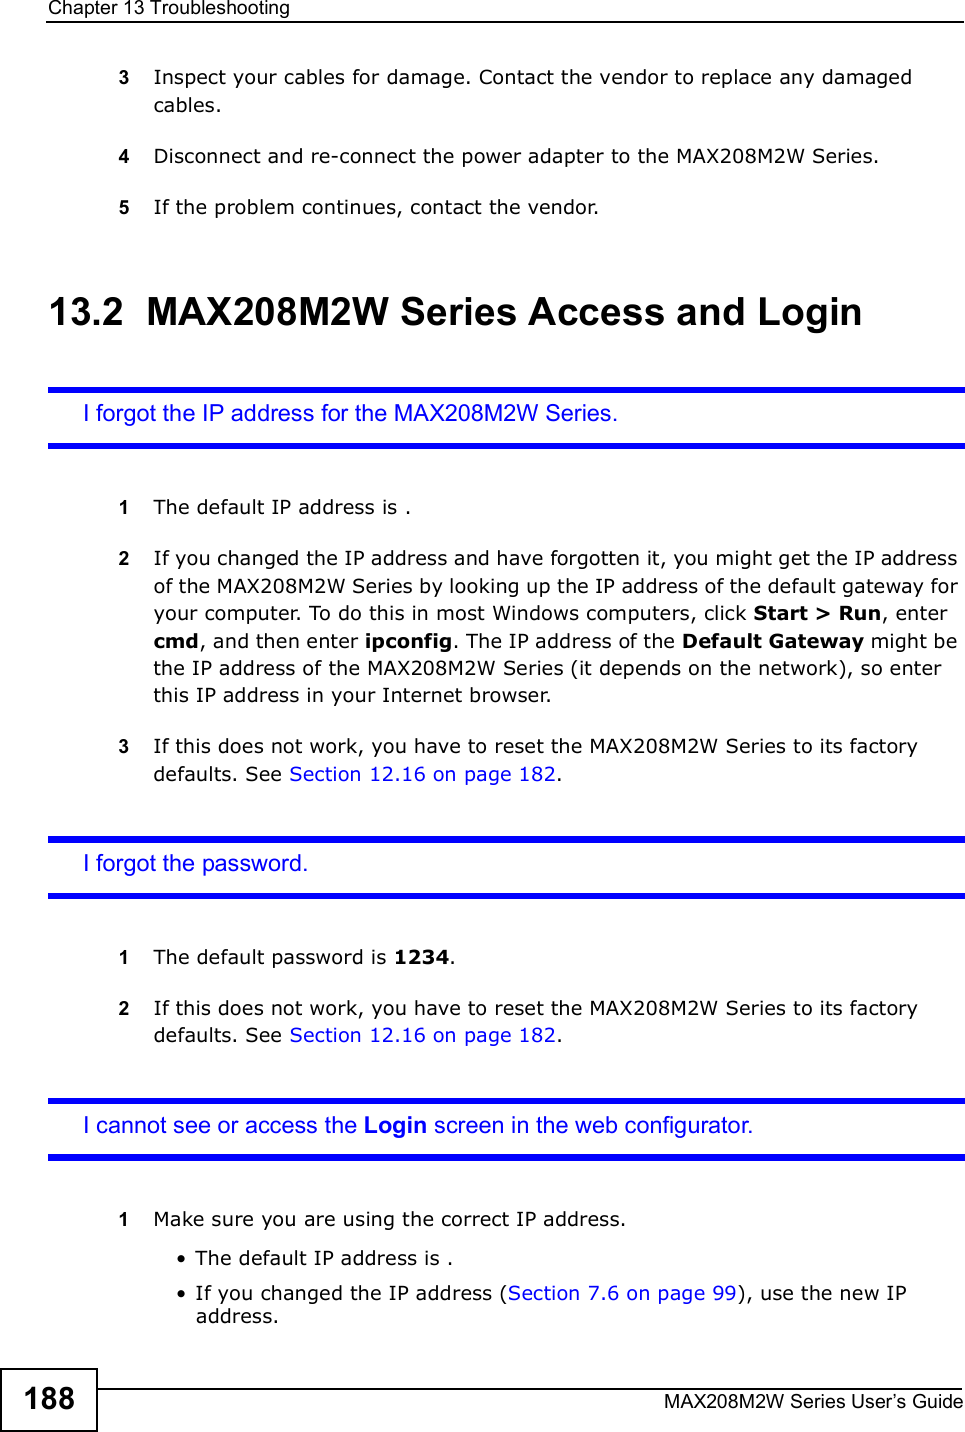 Chapter 13TroubleshootingMAX208M2W Series User s Guide1883Inspect your cables for damage. Contact the vendor to replace any damaged cables.4Disconnect and re-connect the power adapter to the MAX208M2W Series.5If the problem continues, contact the vendor.13.2  MAX208M2W Series Access and LoginI forgot the IP address for the MAX208M2W Series.1The default IP address is .2If you changed the IP address and have forgotten it, you might get the IP address of the MAX208M2W Series by looking up the IP address of the default gateway for your computer. To do this in most Windows computers, click Start &gt; Run, enter cmd, and then enter ipconfig. The IP address of the Default Gateway might be the IP address of the MAX208M2W Series (it depends on the network), so enter this IP address in your Internet browser.3If this does not work, you have to reset the MAX208M2W Series to its factory defaults. See Section 12.16 on page 182.I forgot the password.1The default password is 1234.2If this does not work, you have to reset the MAX208M2W Series to its factory defaults. See Section 12.16 on page 182.I cannot see or access the Login screen in the web configurator.1Make sure you are using the correct IP address.!The default IP address is .!If you changed the IP address (Section 7.6 on page 99), use the new IP address.